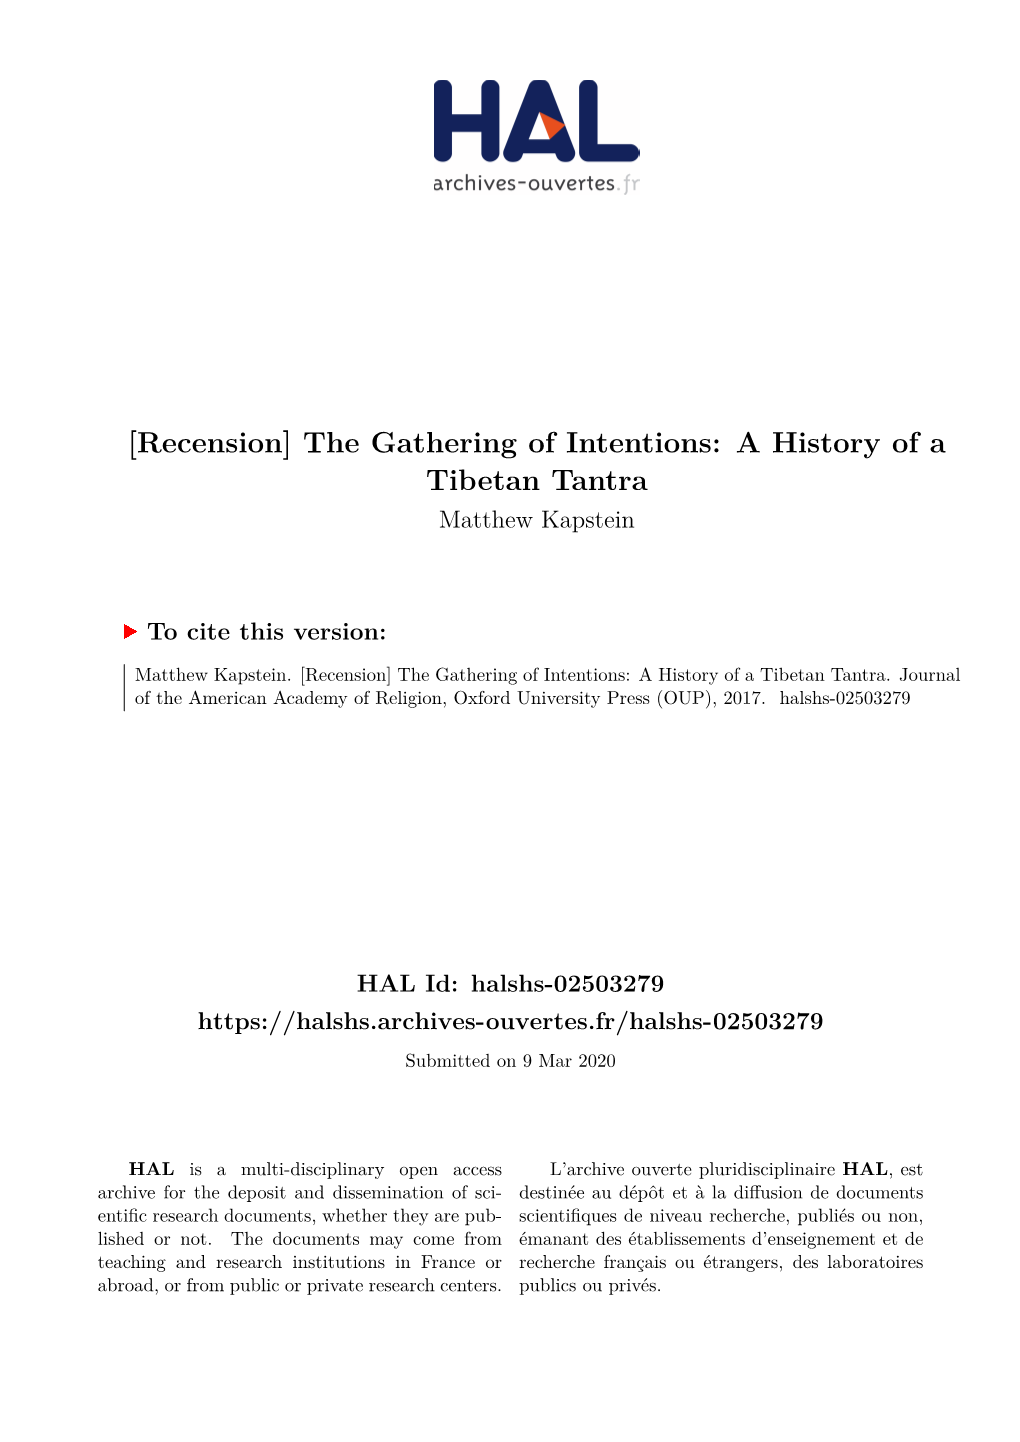 The Gathering of Intentions: a History of a Tibetan Tantra Matthew Kapstein